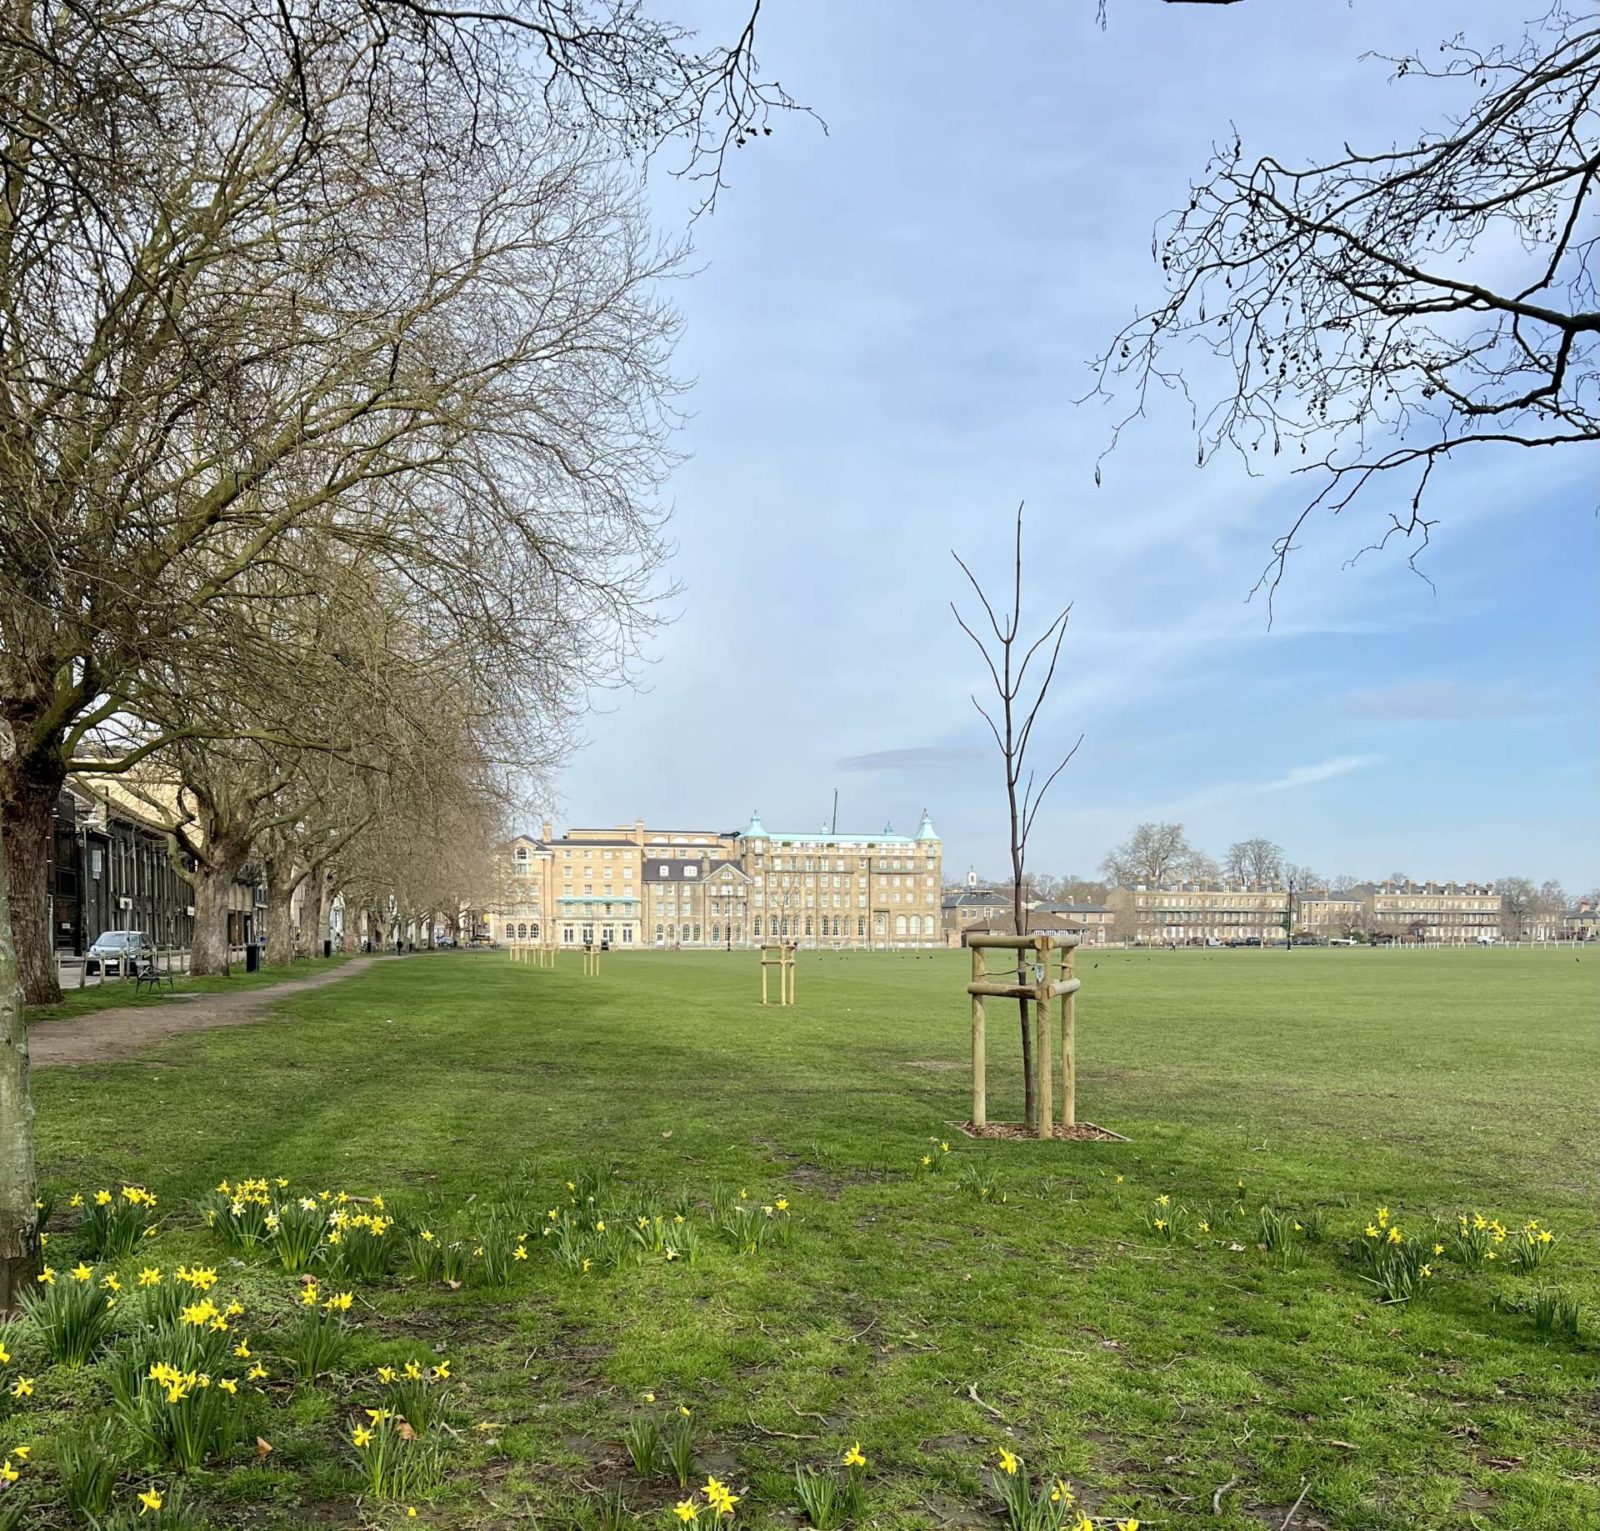 Open green space with georgina buildings in the distance